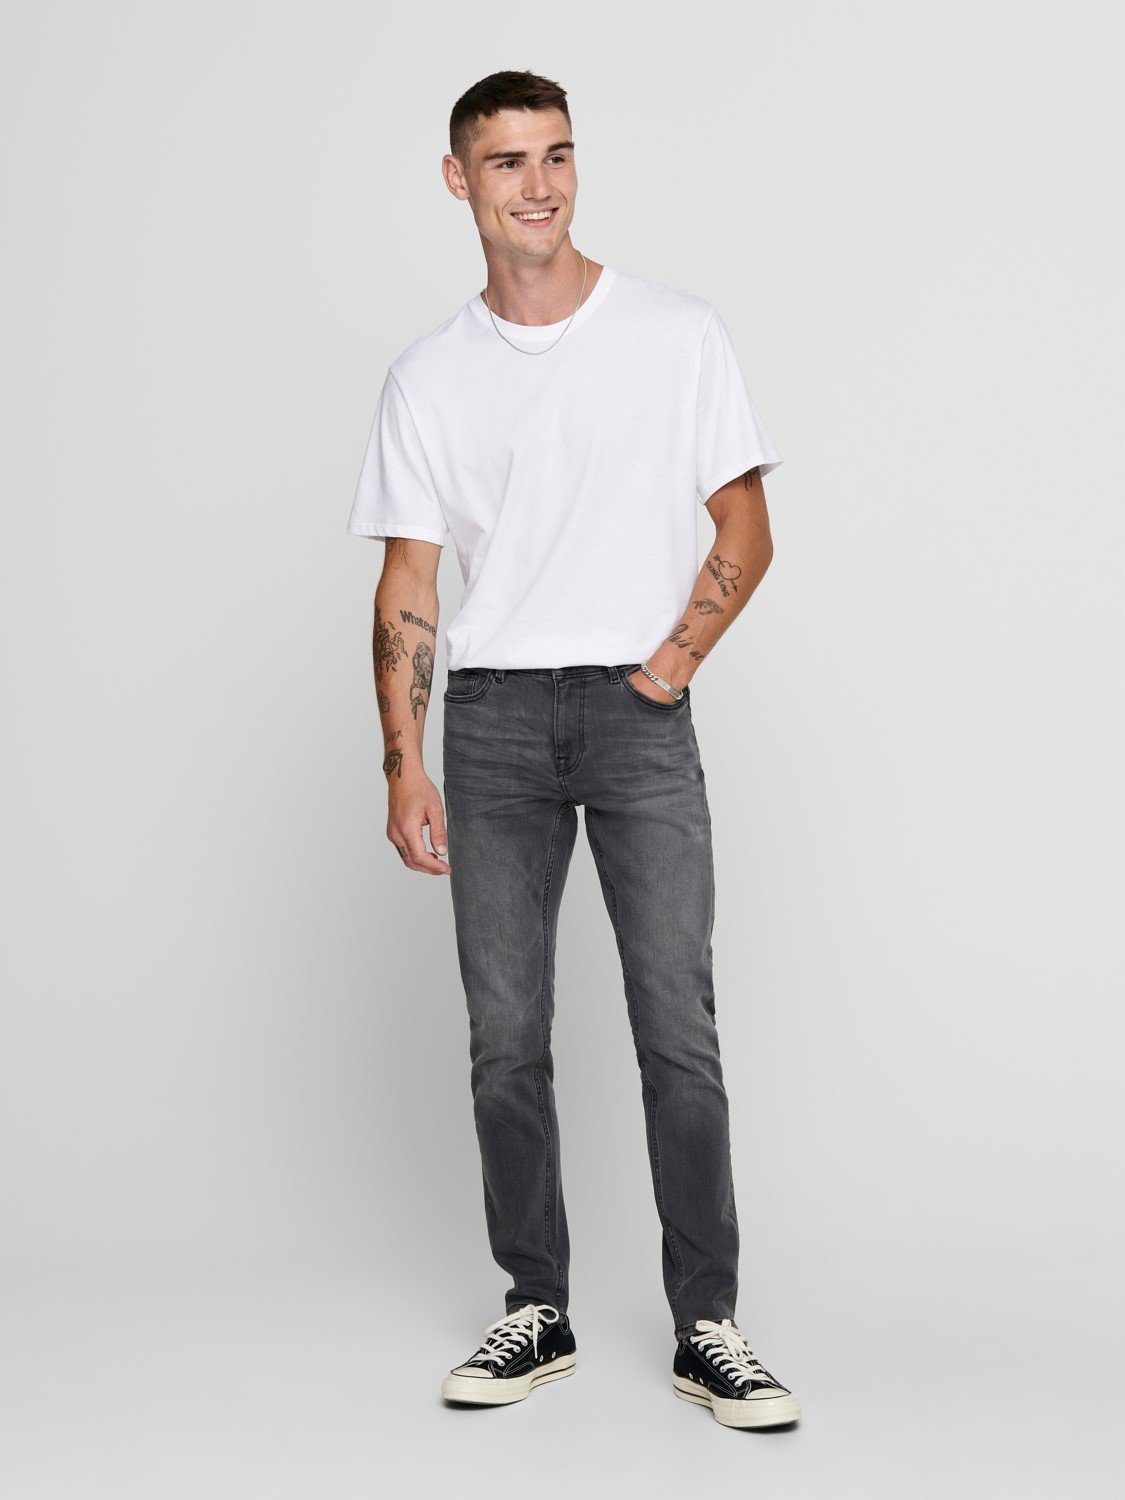 Fit ONSWARP & Jeans Grau Basic Pants Hose in 3977 Slim-fit-Jeans Denim Washed SONS (1-tlg) Stoned ONLY Skinny